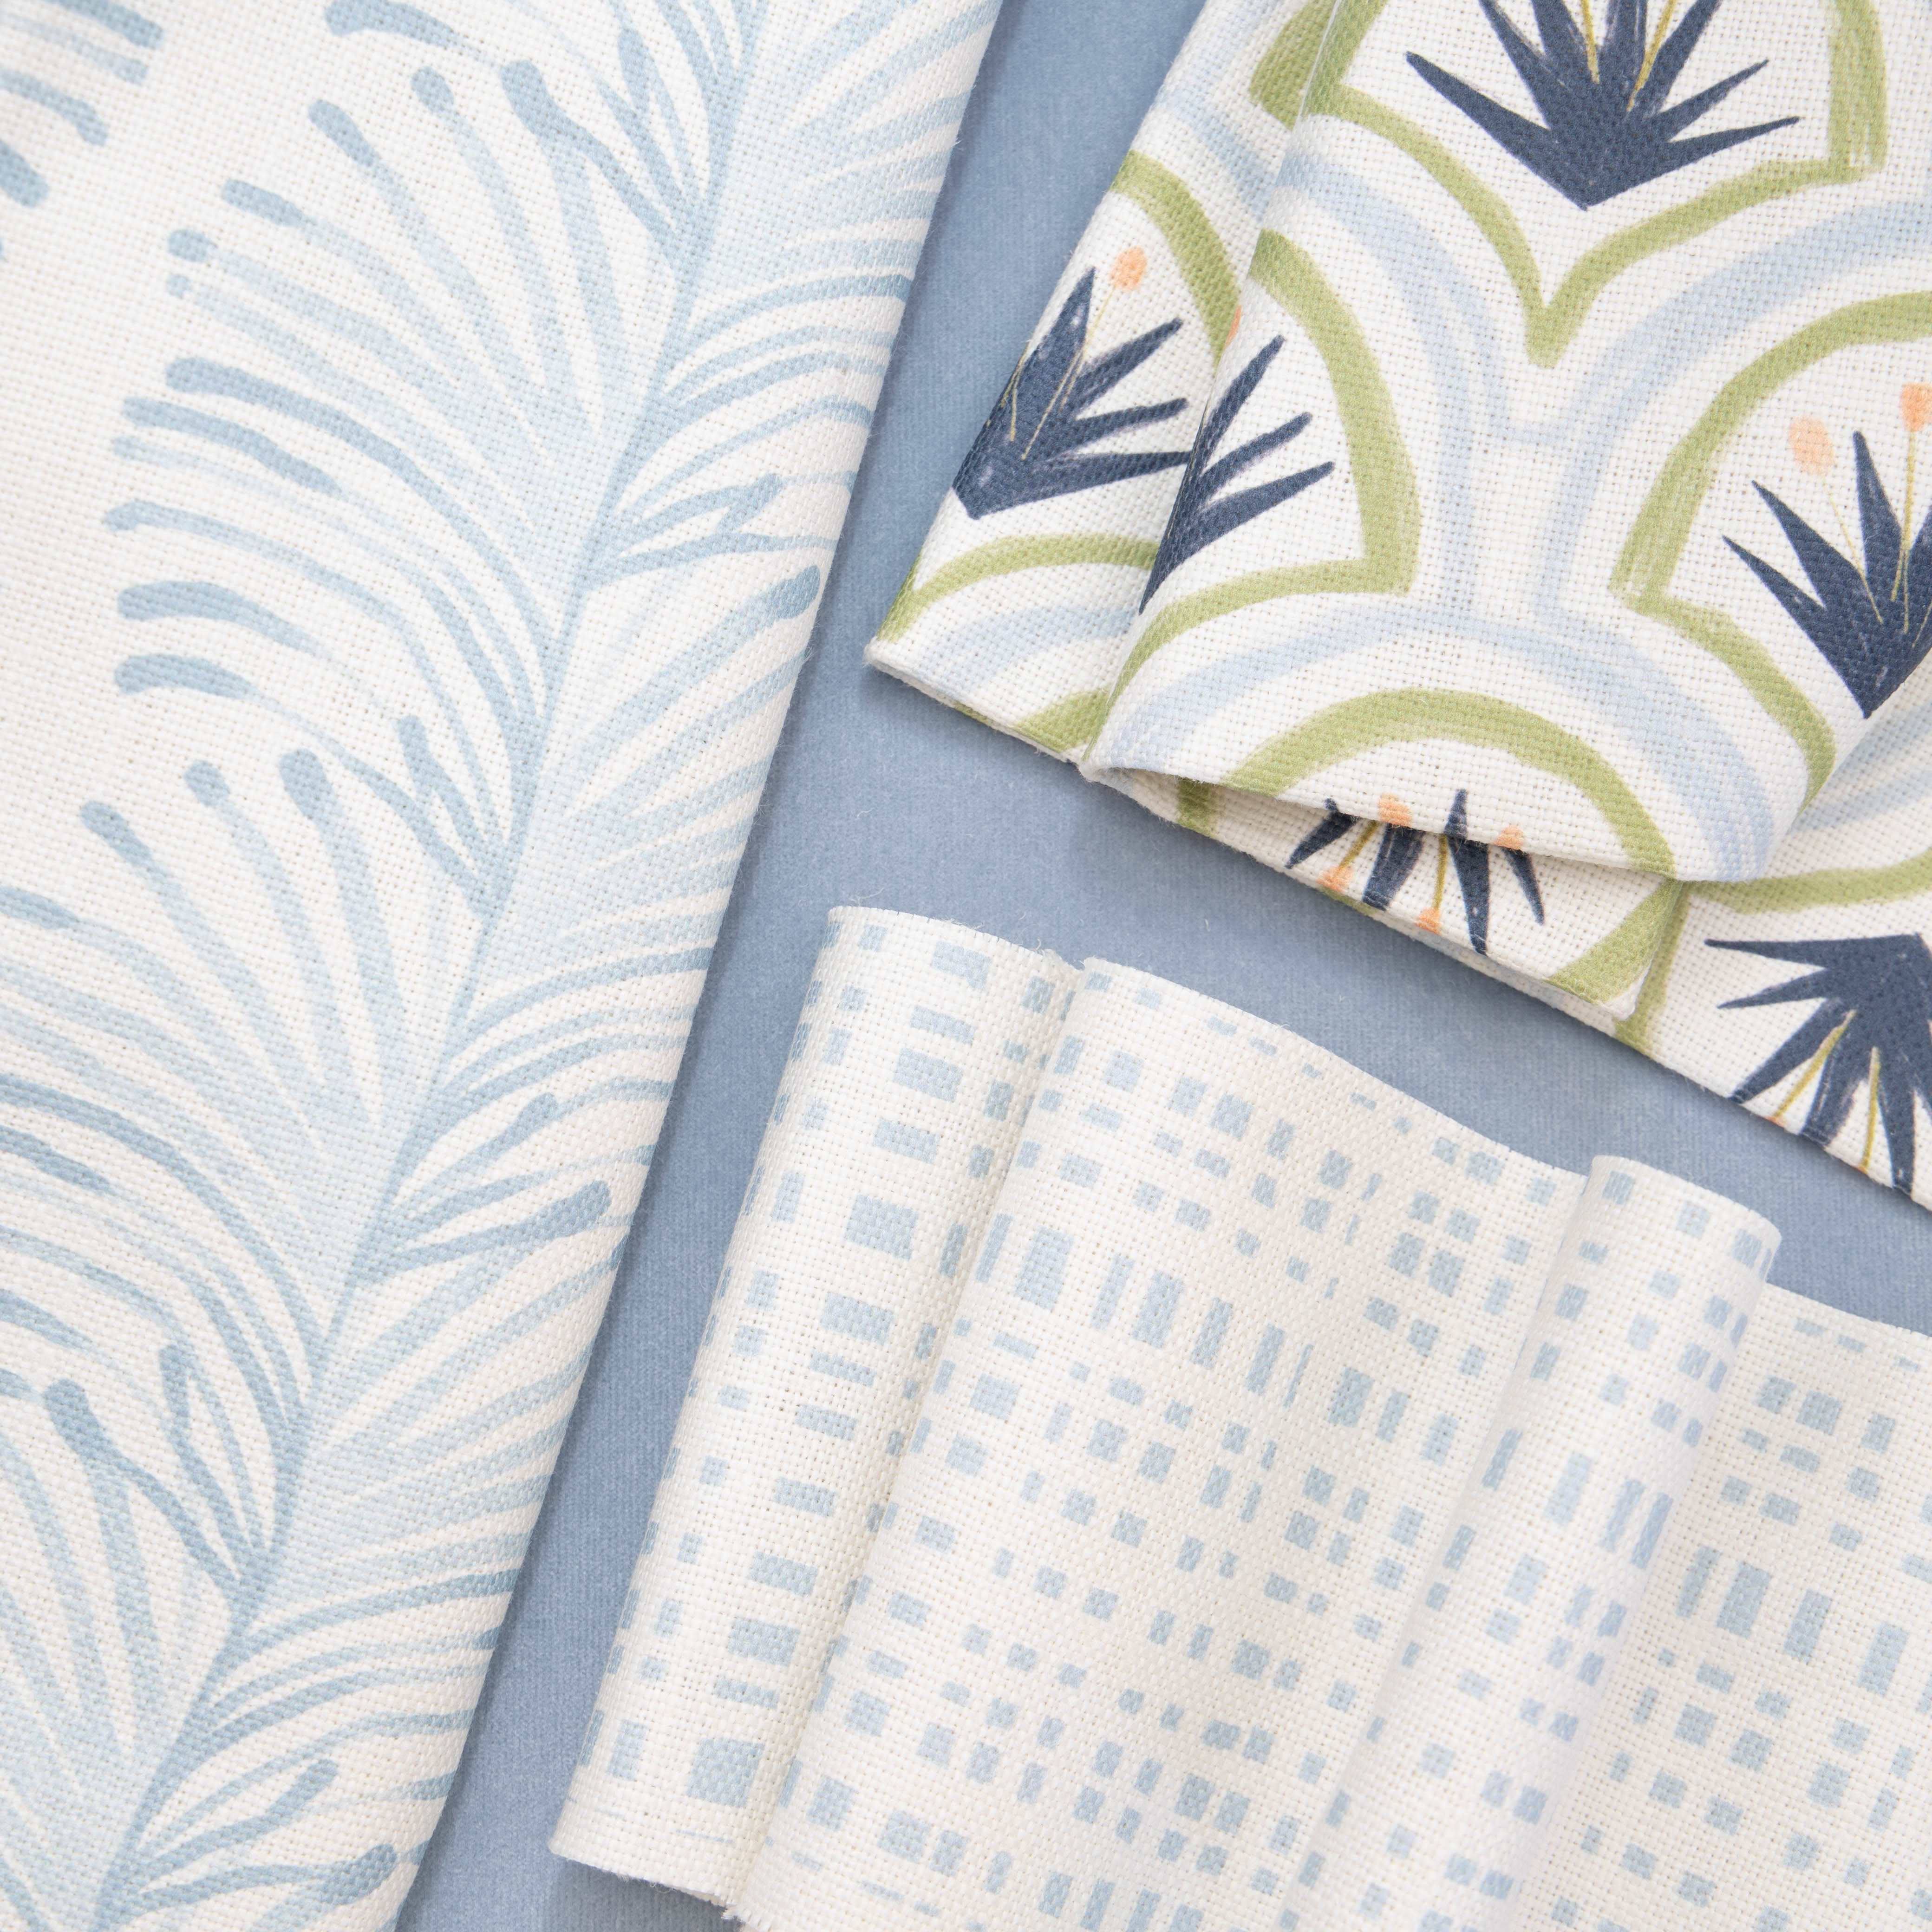 Close-up of Interior design moodboard and fabric inspirations with Sky Blue Gingham Printed Swatch, Sky Blue Botanical Stripe Printed Swatch, and Sky and Art Deco Palm Pattern Printed Swatch